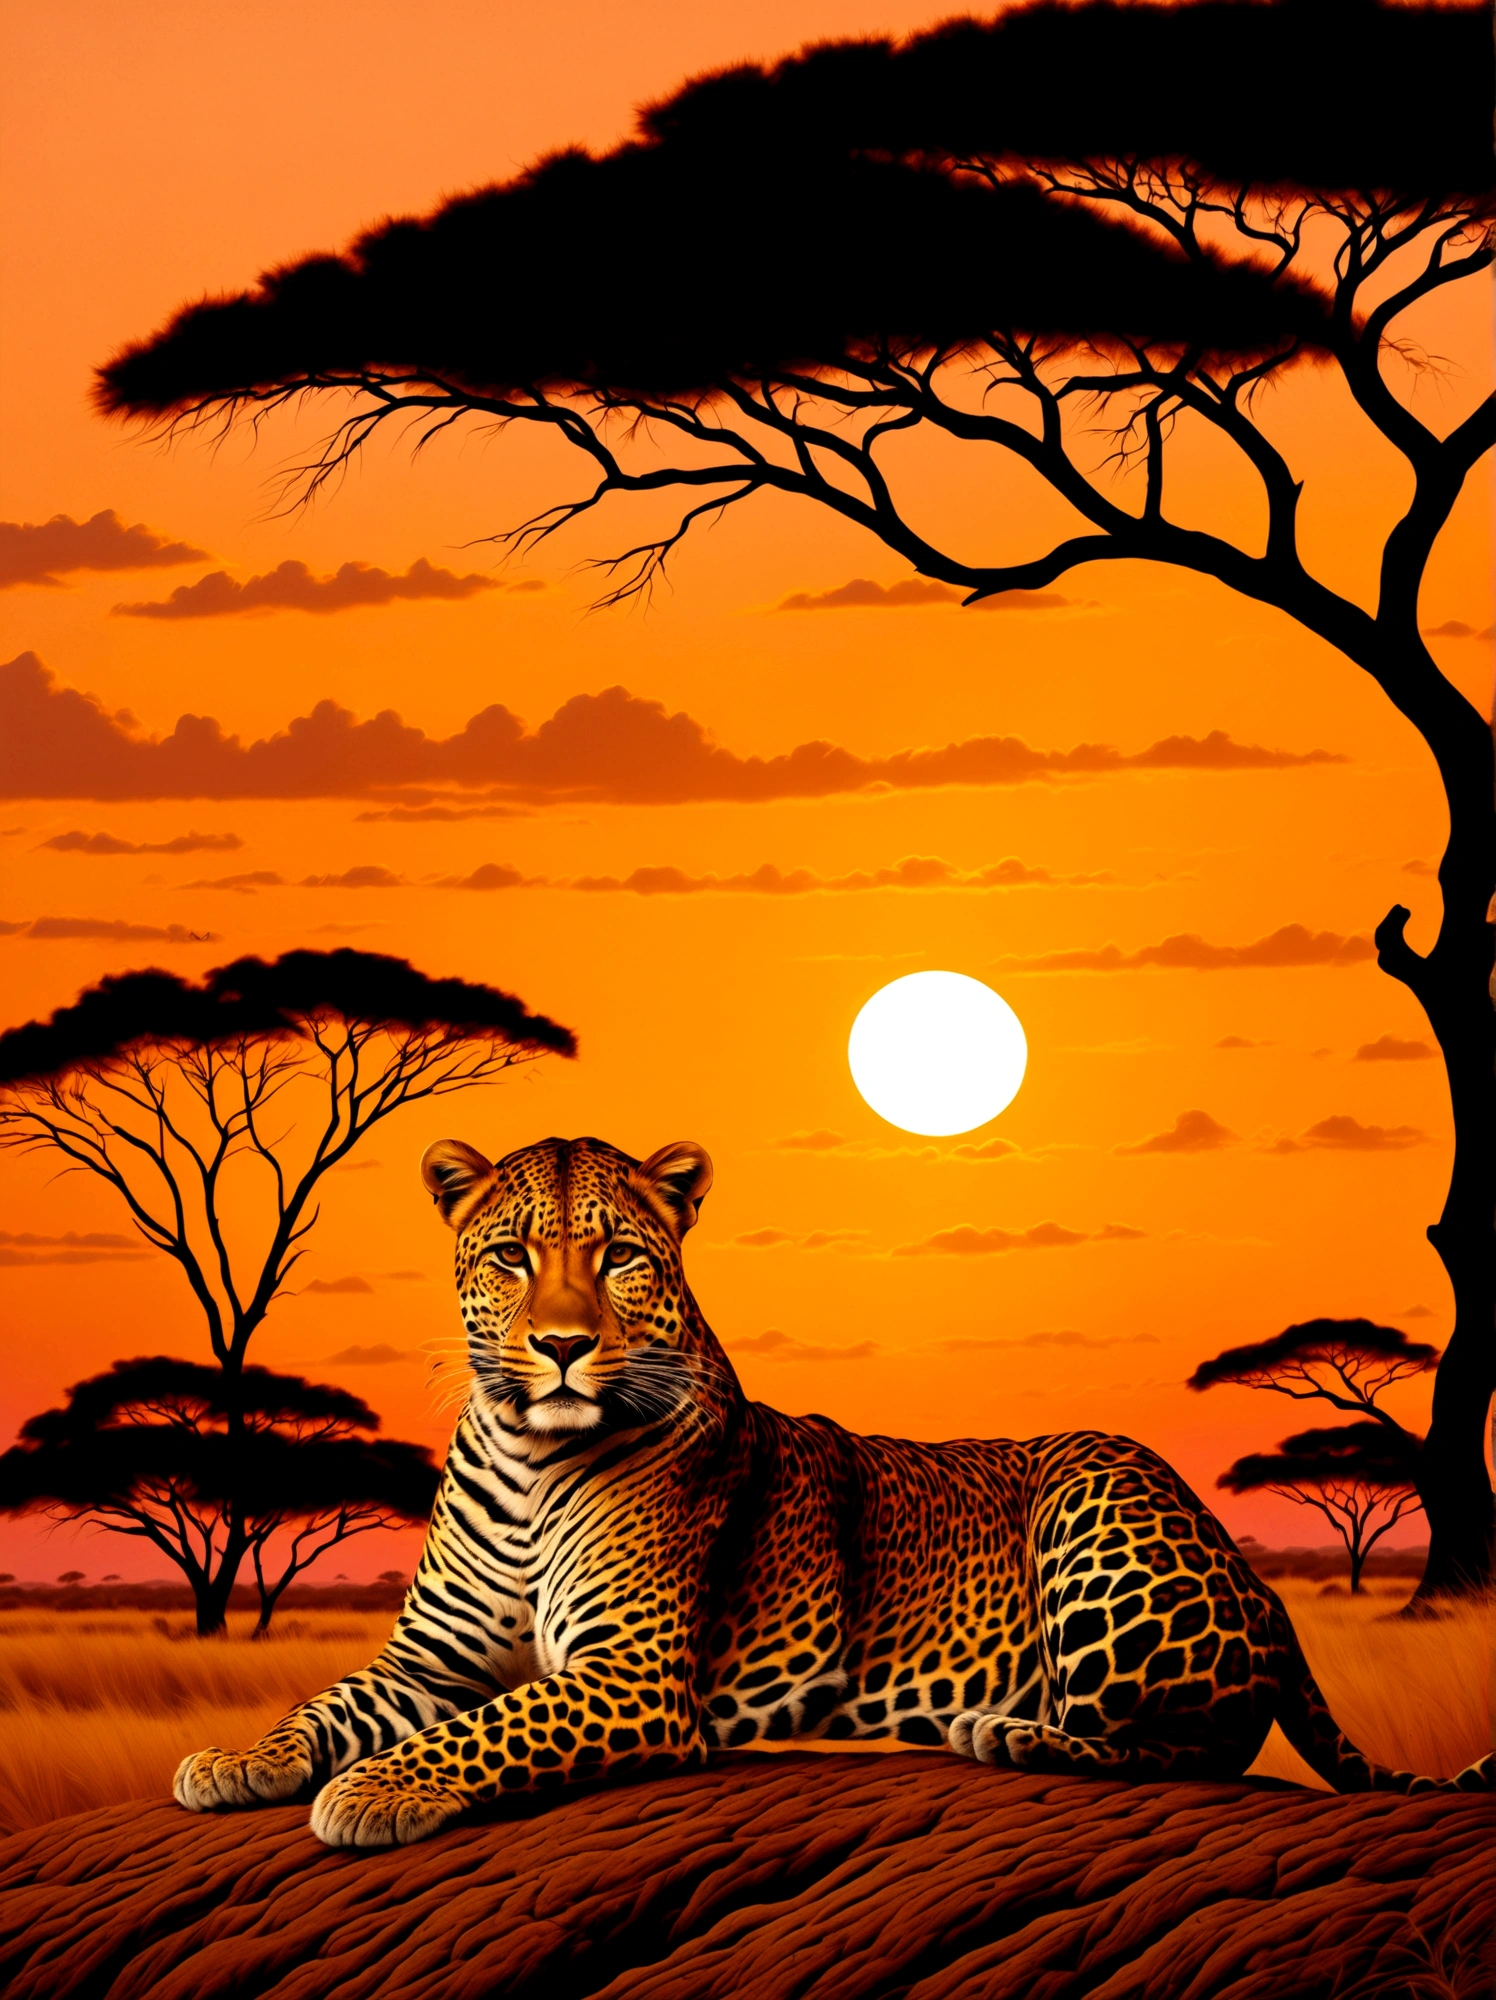 A leopard with a golden crown resting on its head, majestically poised against the backdrop of a sunset in the Savannah. The crown lightly glistens in the failing sunlight as the creature stands surveying its surroundings. Warm orange and pink hues from the setting sun drape the scene, highlighting the leopard's vibrant coat of fur. Silhouettes of acacia trees can be seen in the far-off distance, dotting the vast landscape.